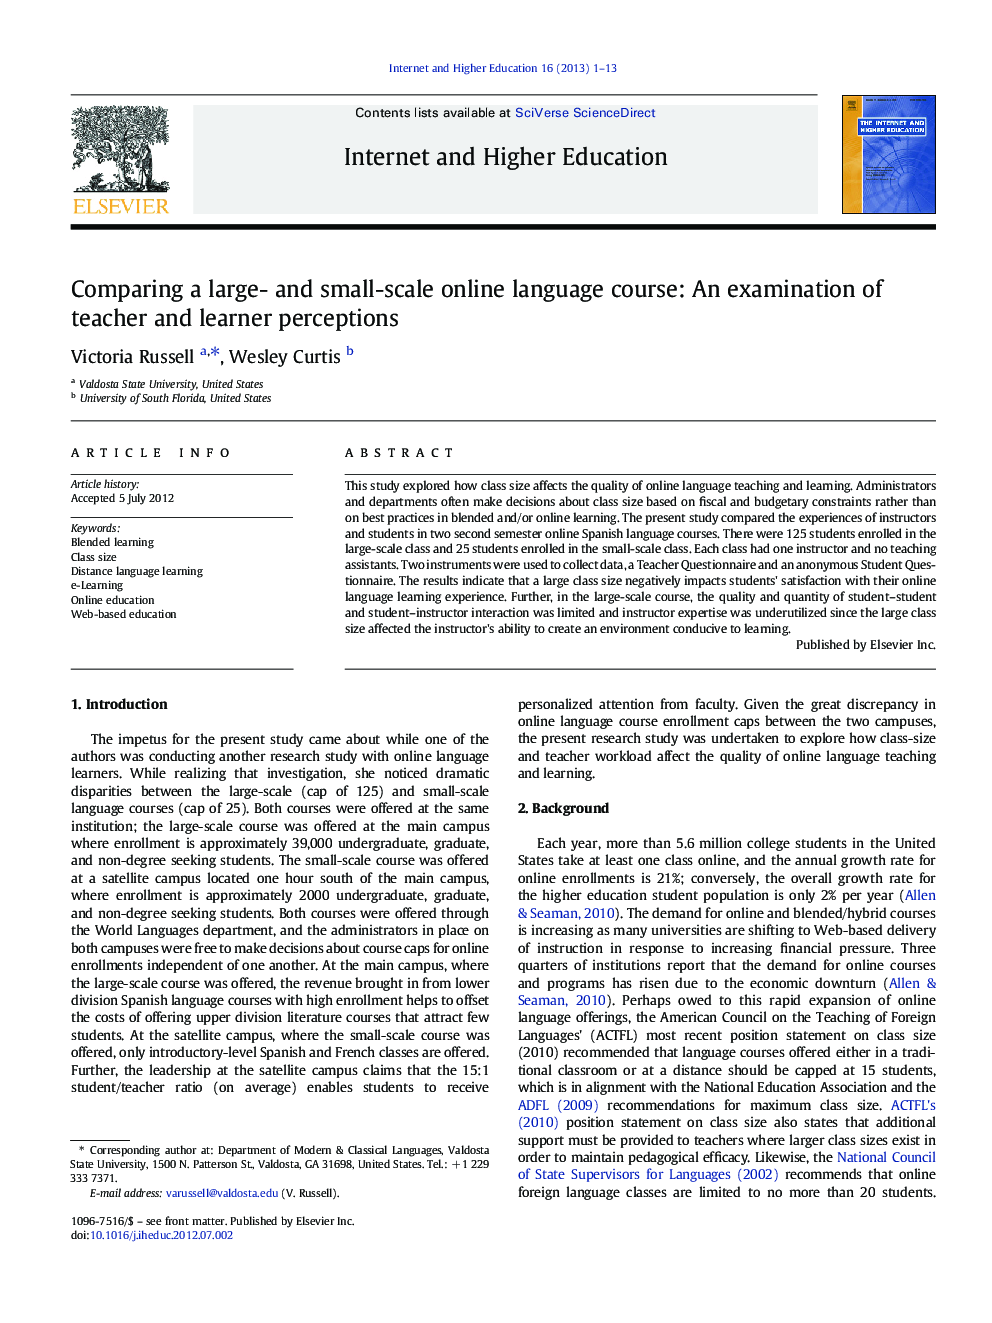 Comparing a large- and small-scale online language course: An examination of teacher and learner perceptions